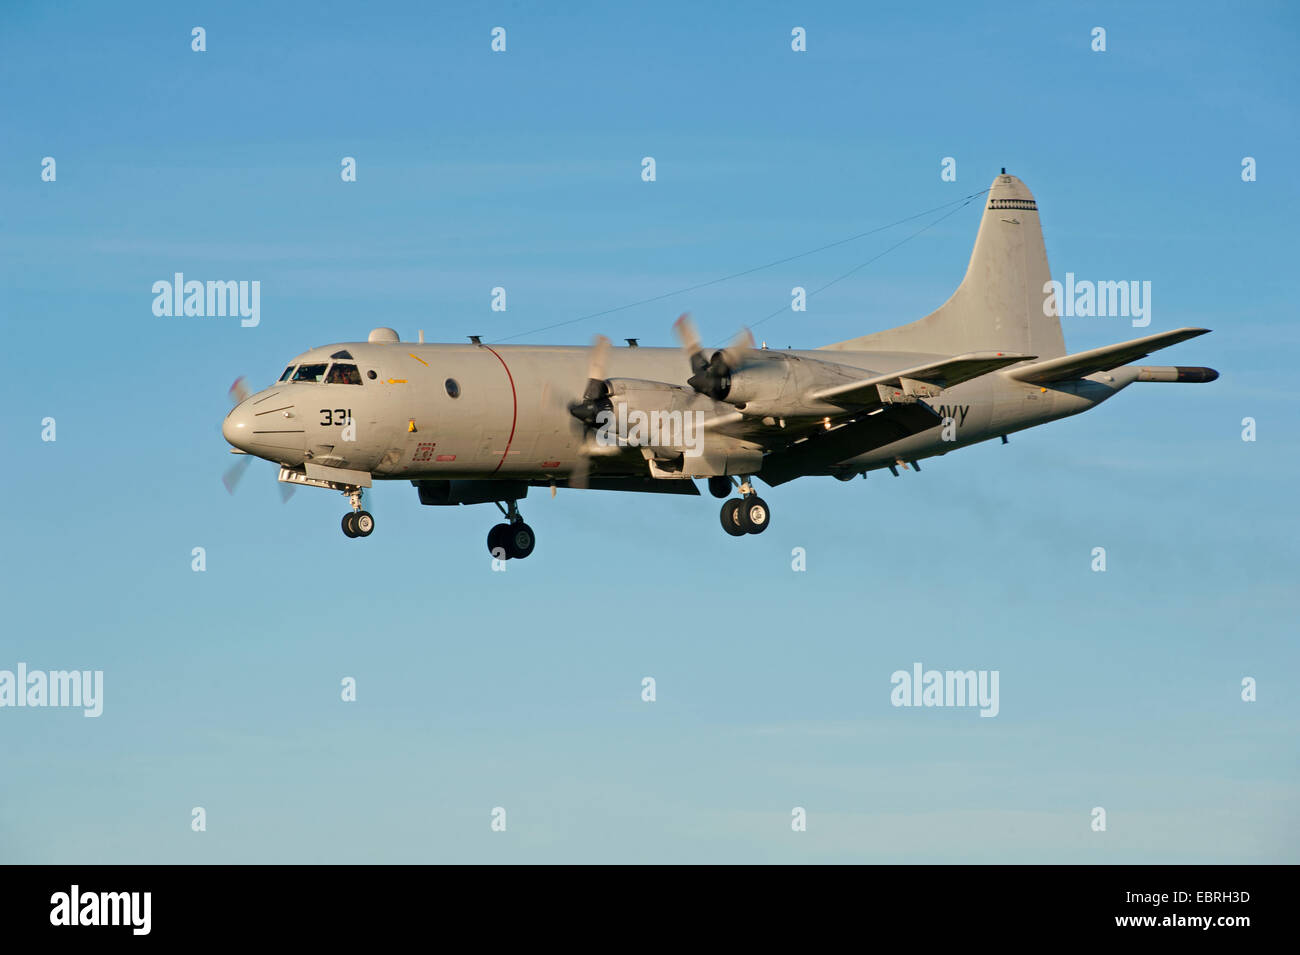 A Lockheed Martin 4 Engined P3 Orion Surveillance and Submarine Hunter Aircraft arriving in Morayshire, Scotland.  SCO 9297. Stock Photo